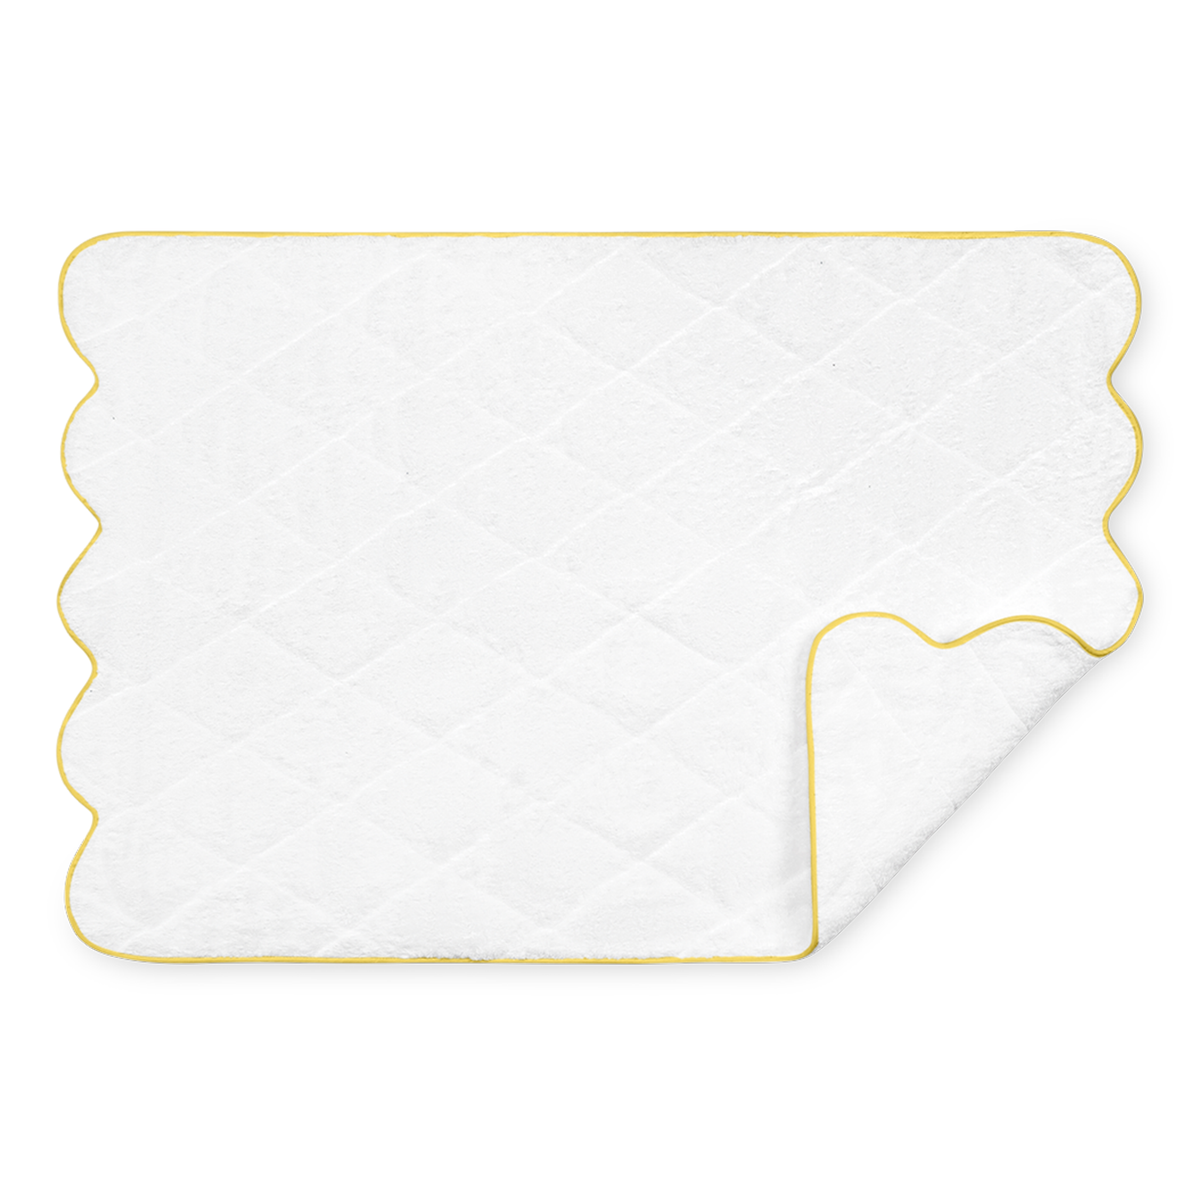 Quilted Tub Mat of Matouk Cairo Scallop in Color Lemon